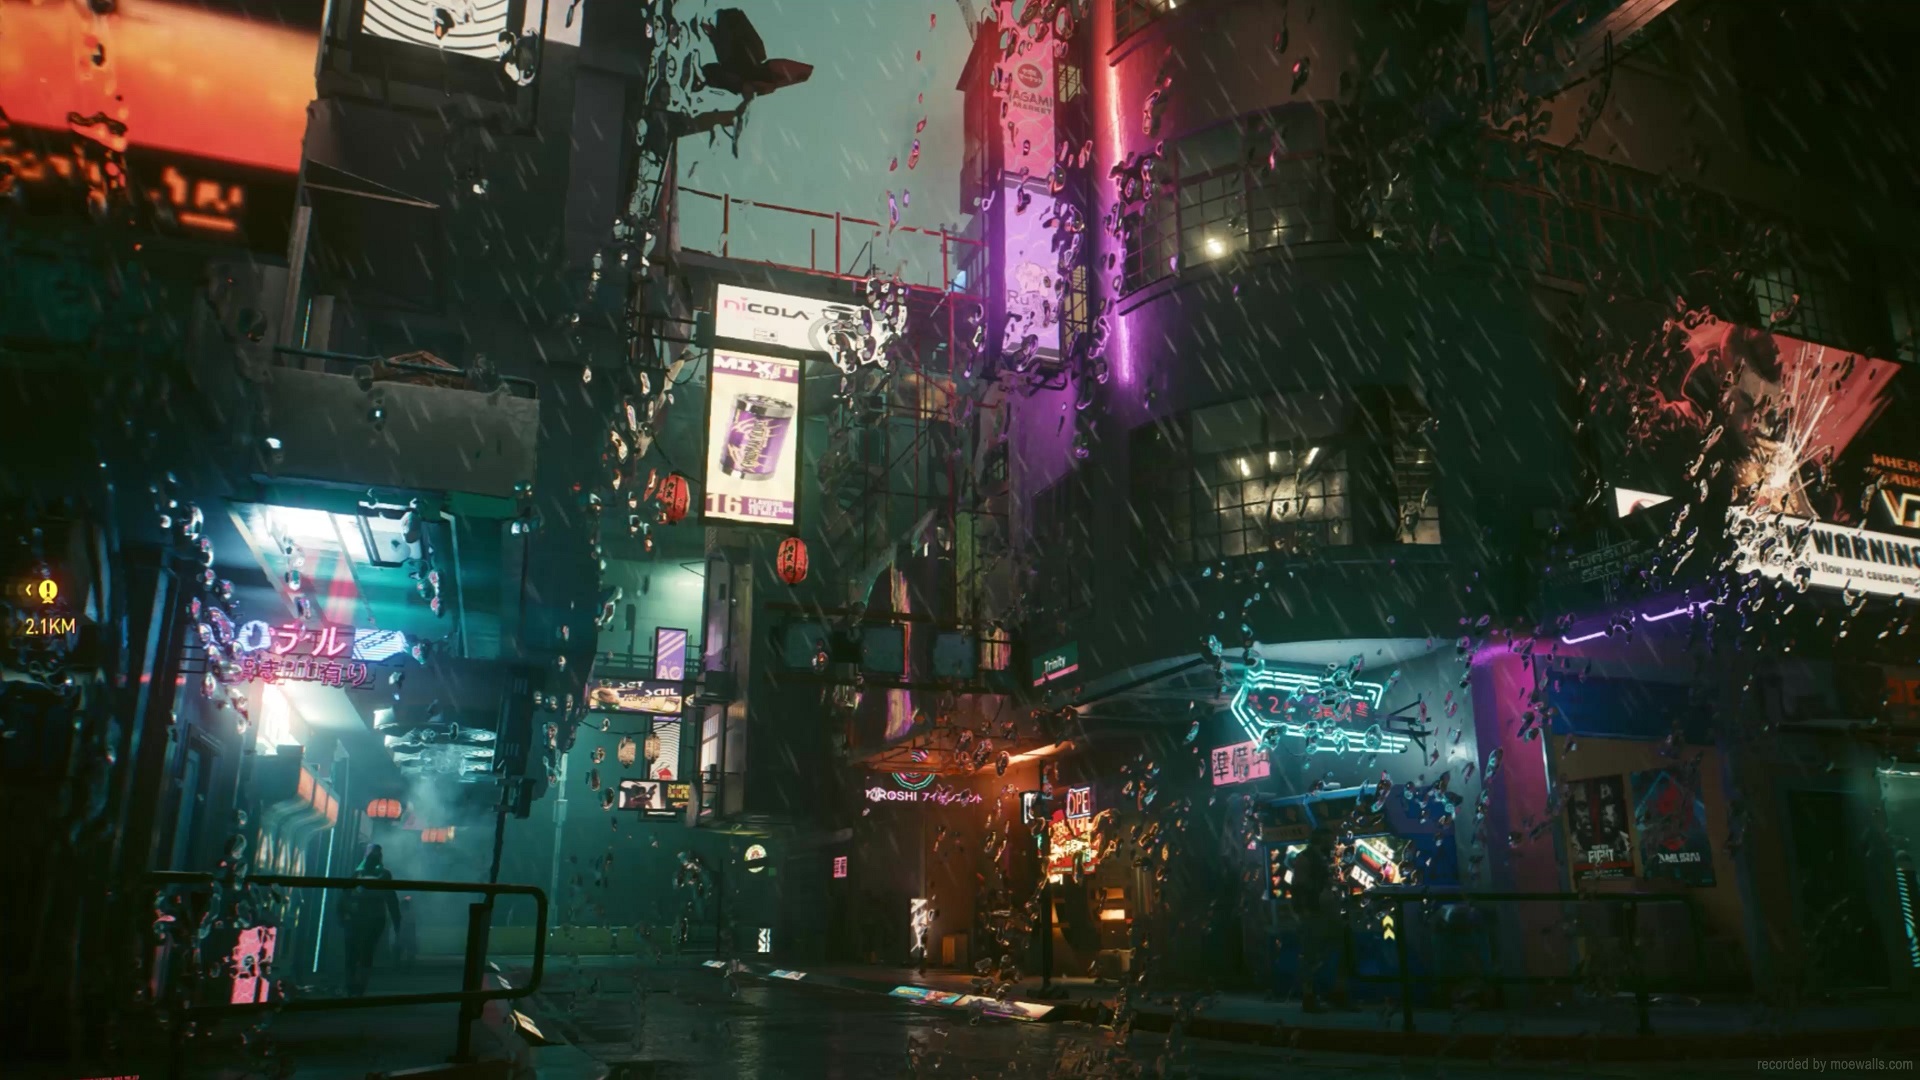 V (Cyberpunk 2077) wallpapers for desktop, download free V (Cyberpunk 2077)  pictures and backgrounds for PC